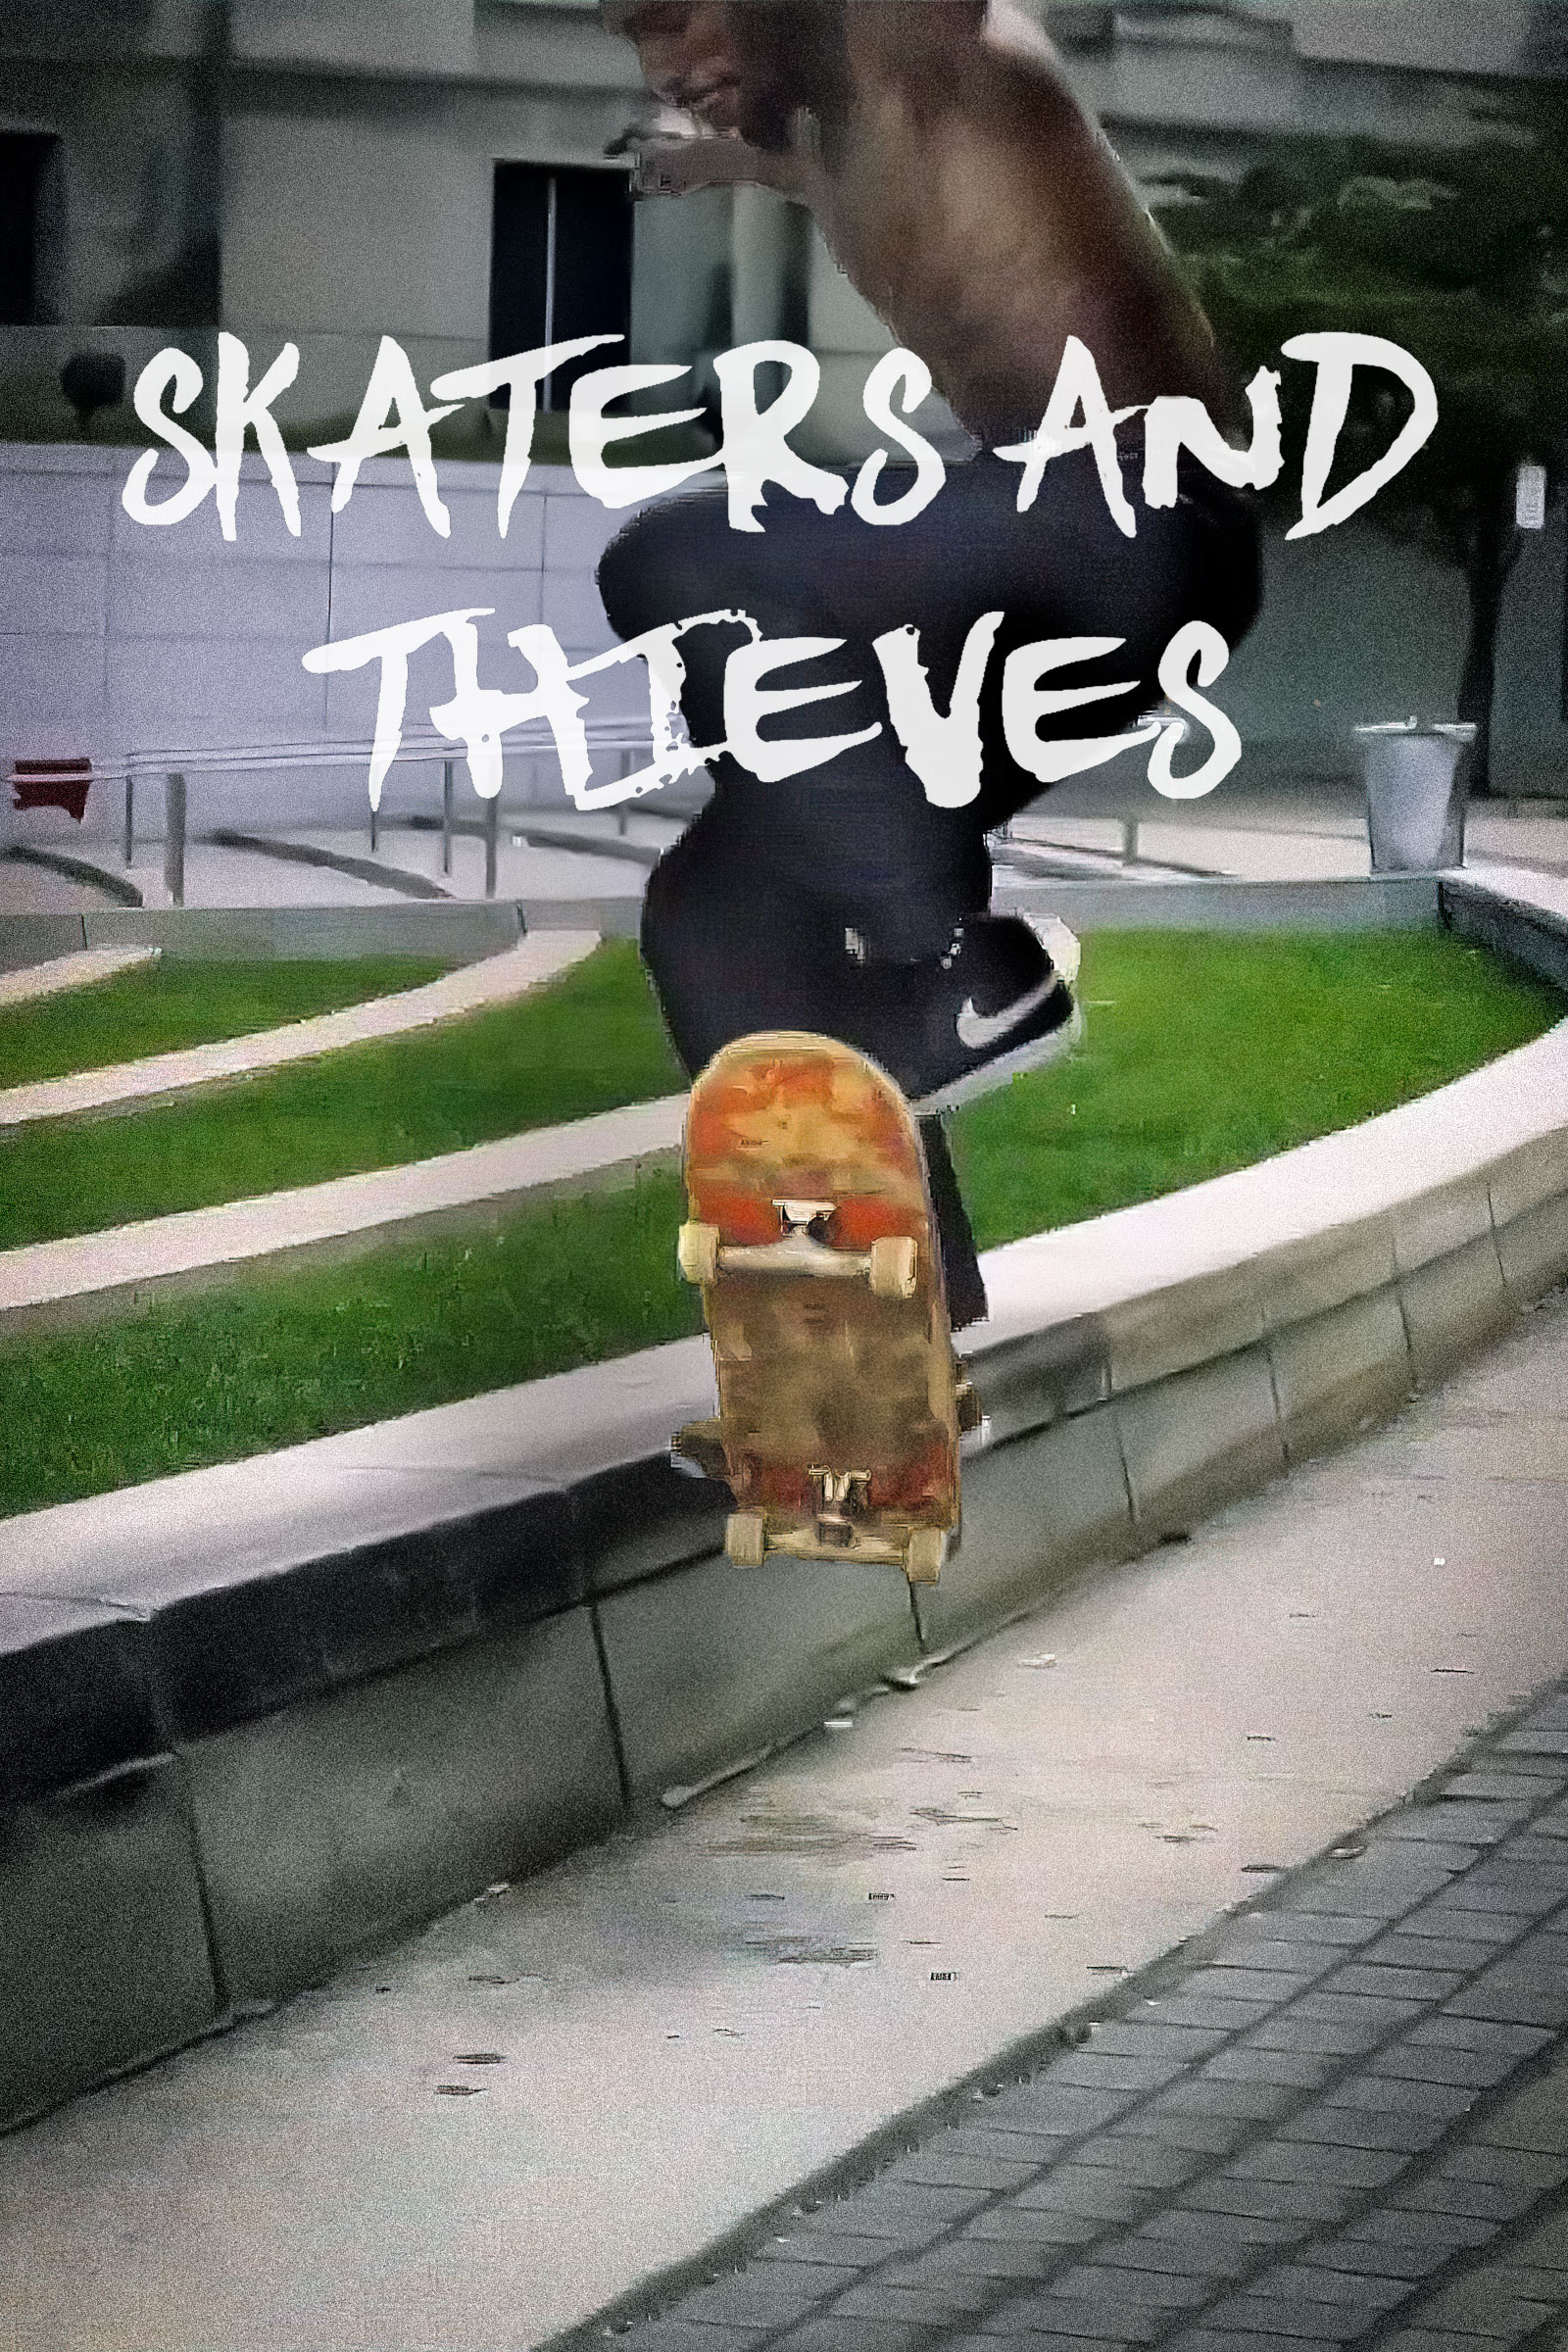 Where to stream Skaters And Thieves